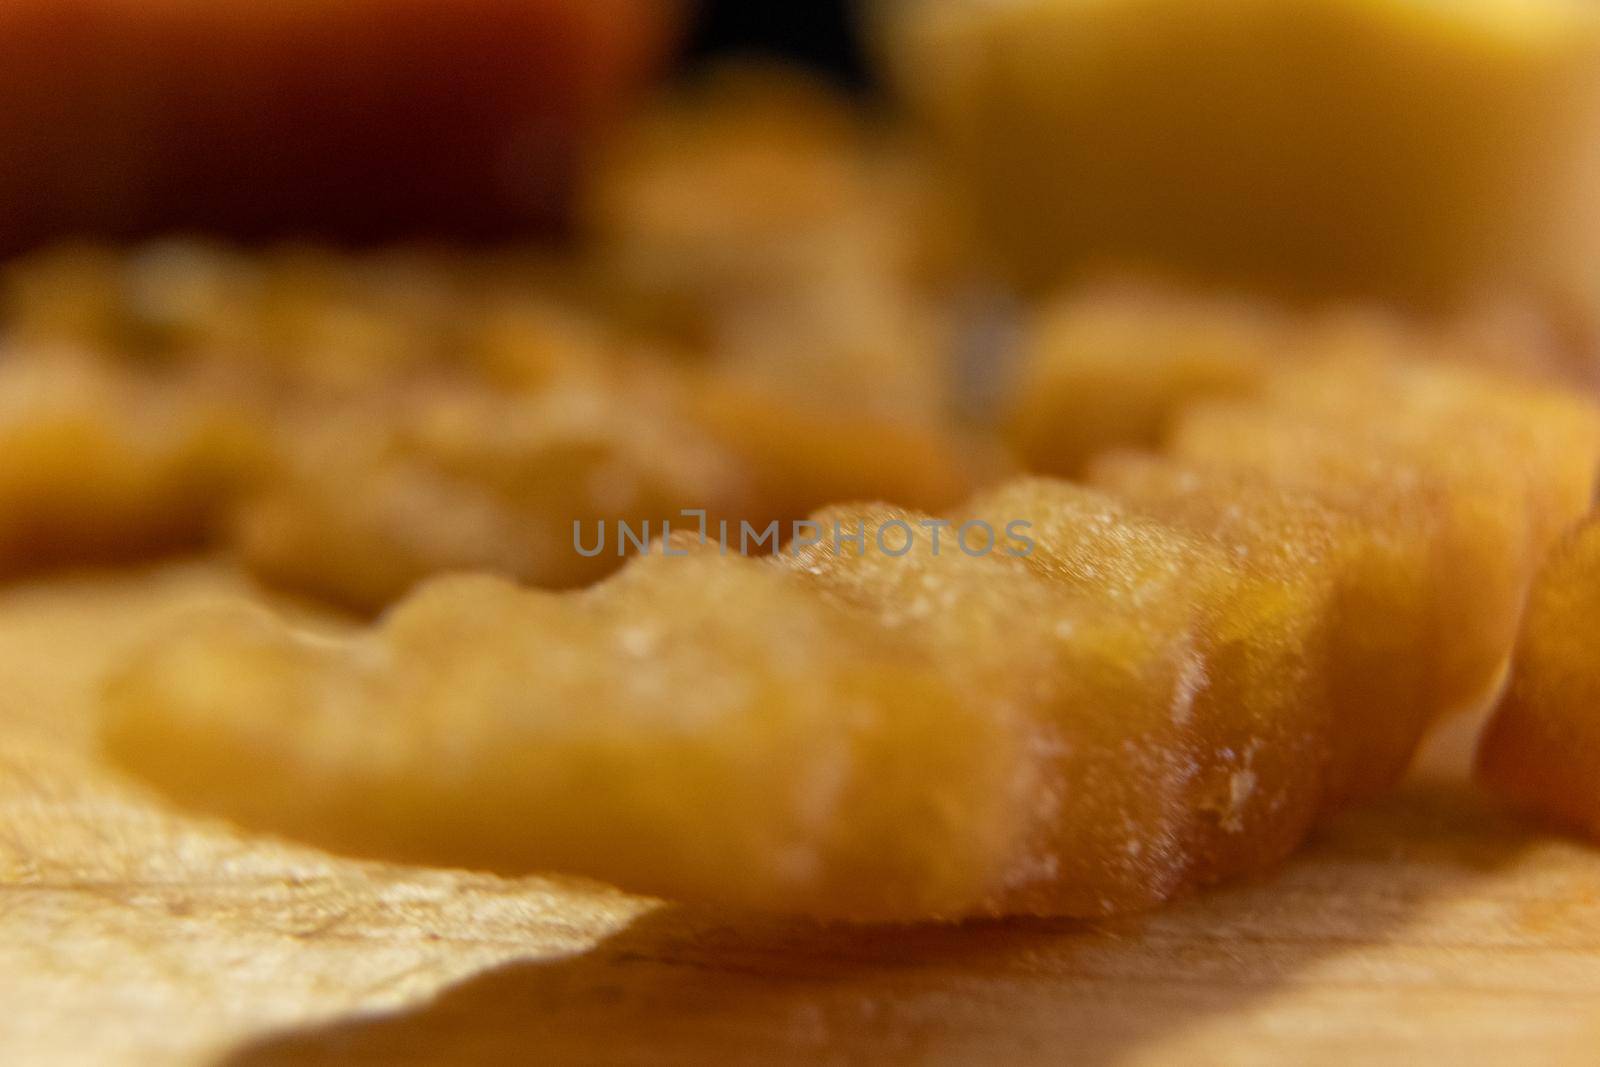 Extreme close-up of wavy French fry on wooden surface with blurry cups of ketchup and melted cheese as background. Tasty fried snacks and two glasses of red and yellow dressing. Delicious fast food